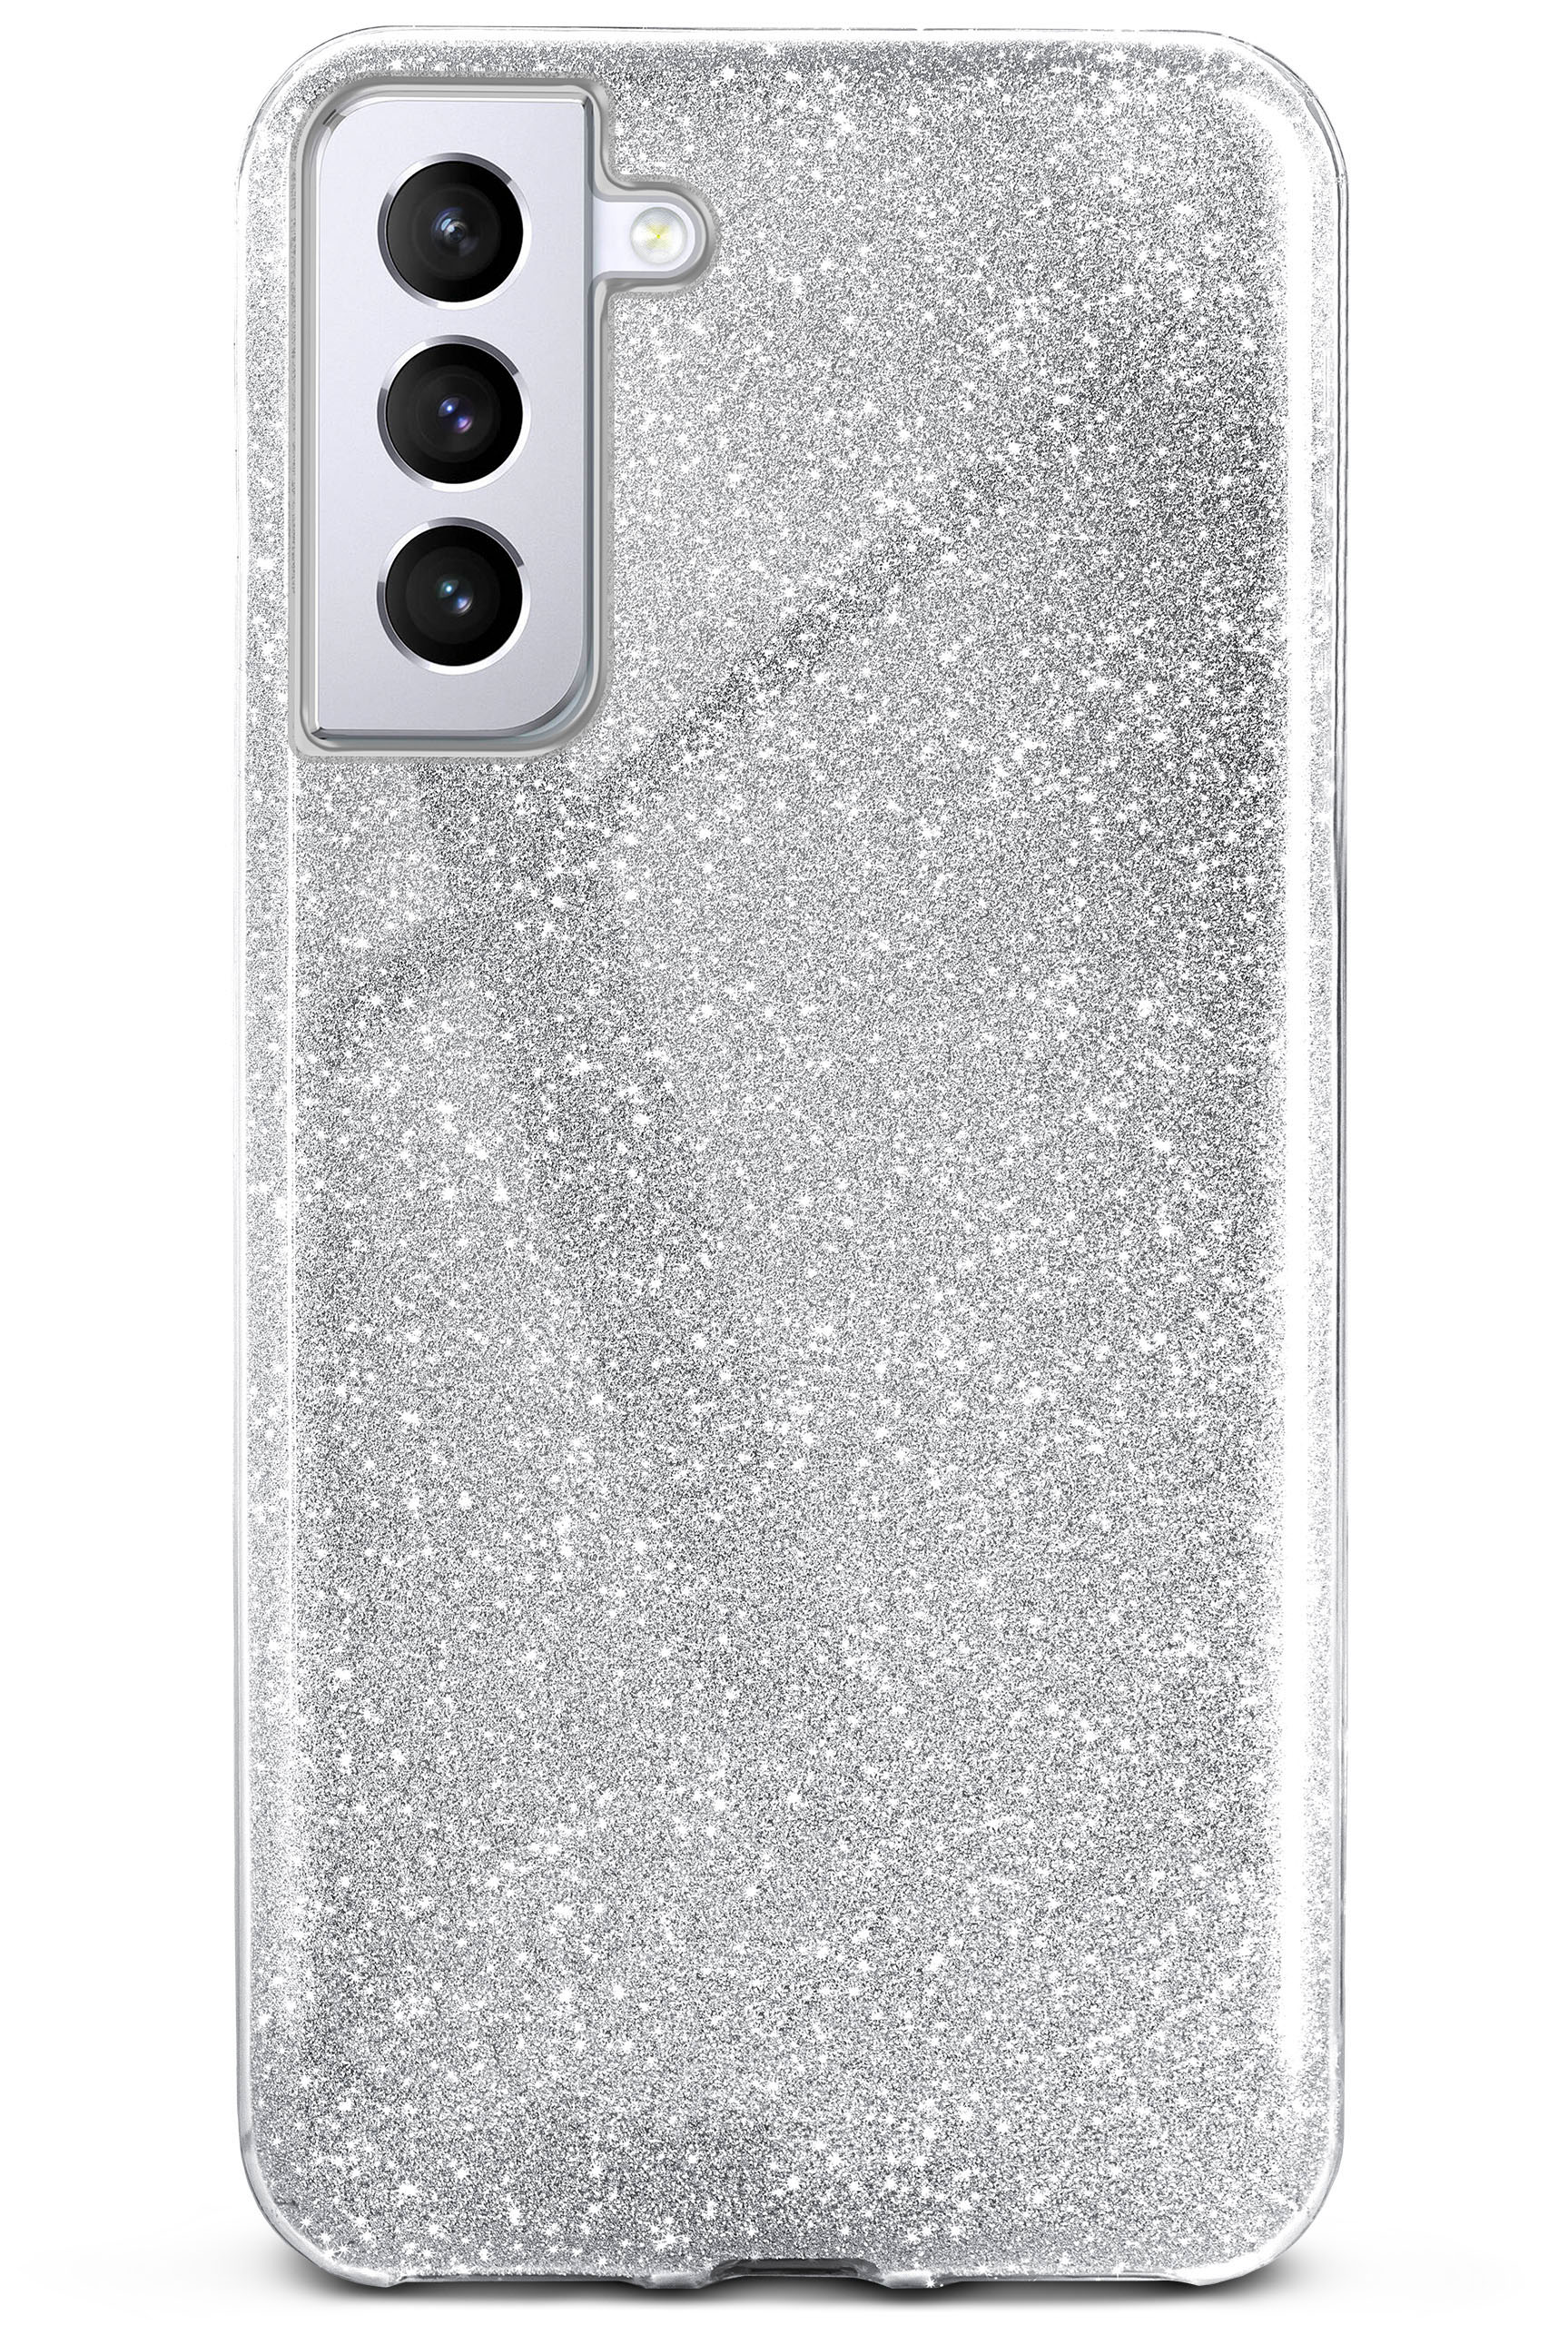 ONEFLOW Backcover, Samsung, Case, Sparkle - S21 Galaxy Plus, Silver Glitter